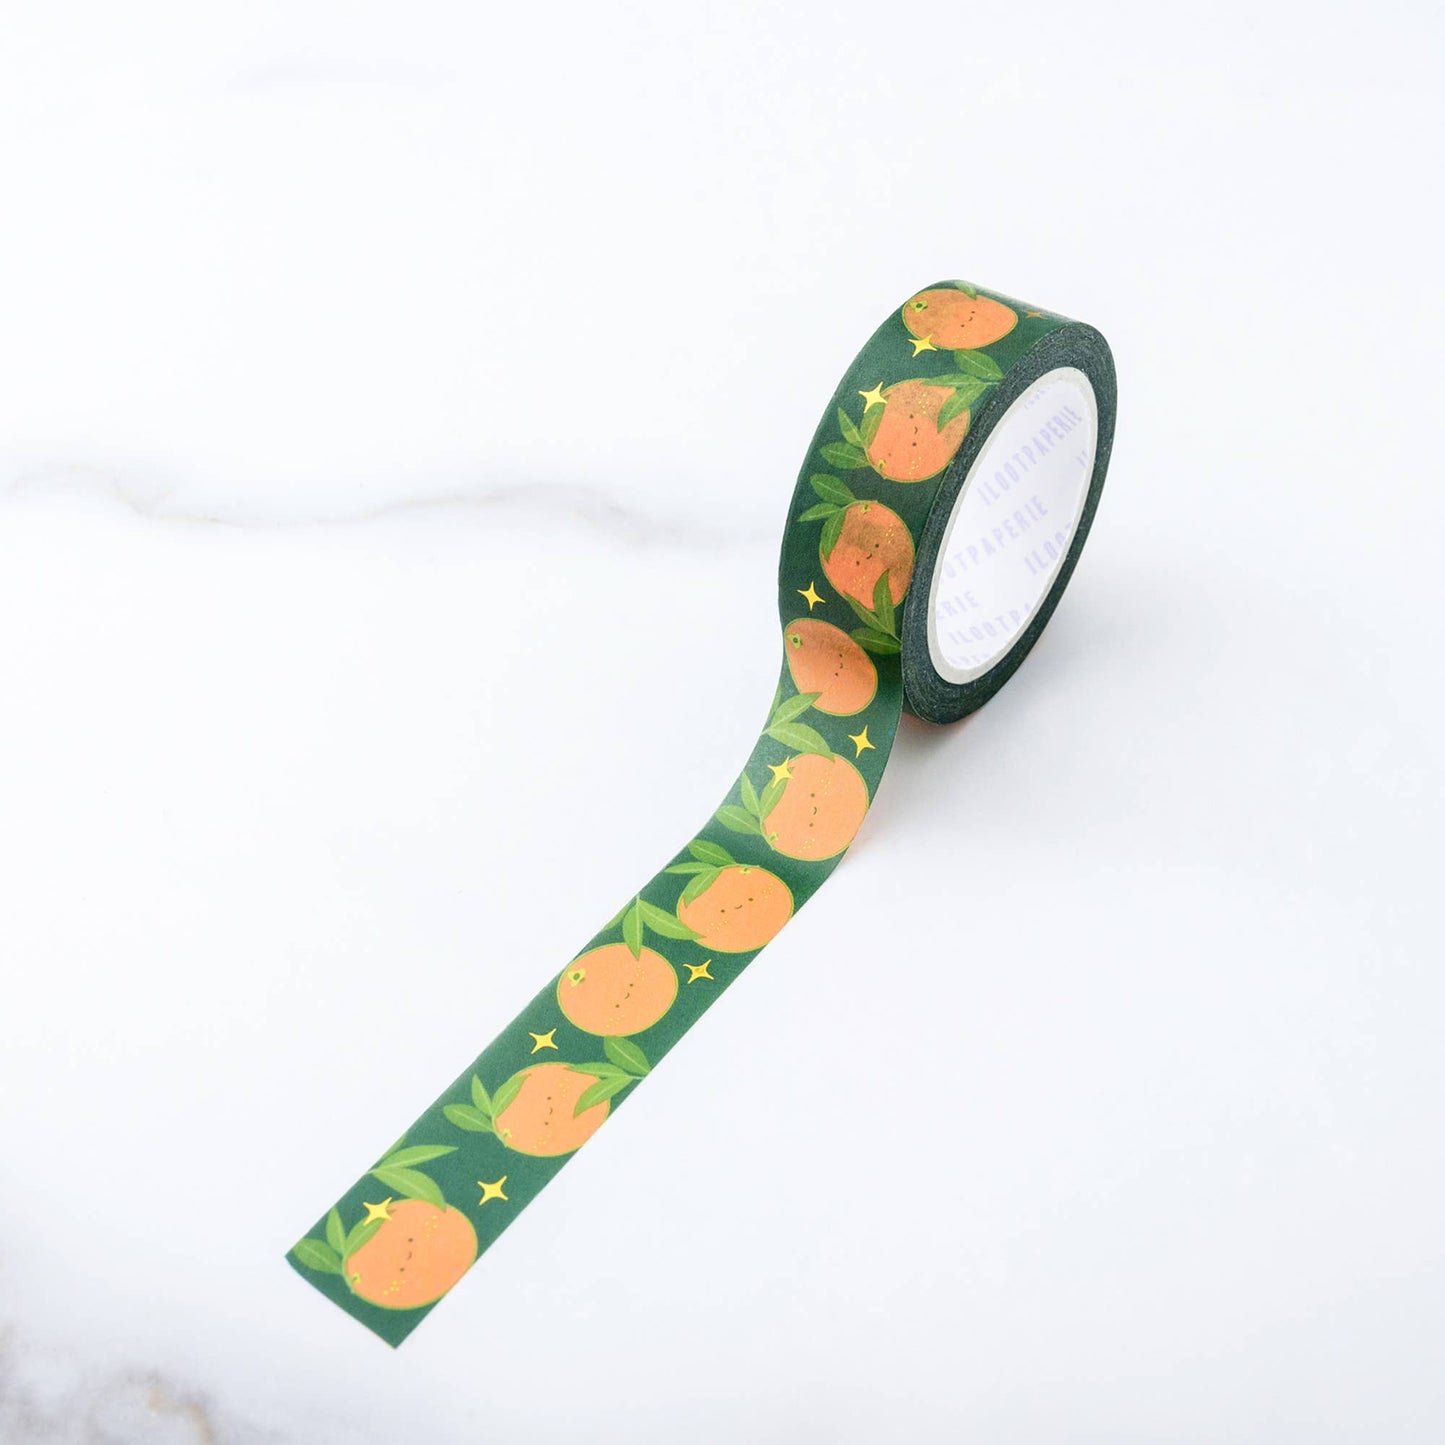 Washi tape roll with oranges on them 